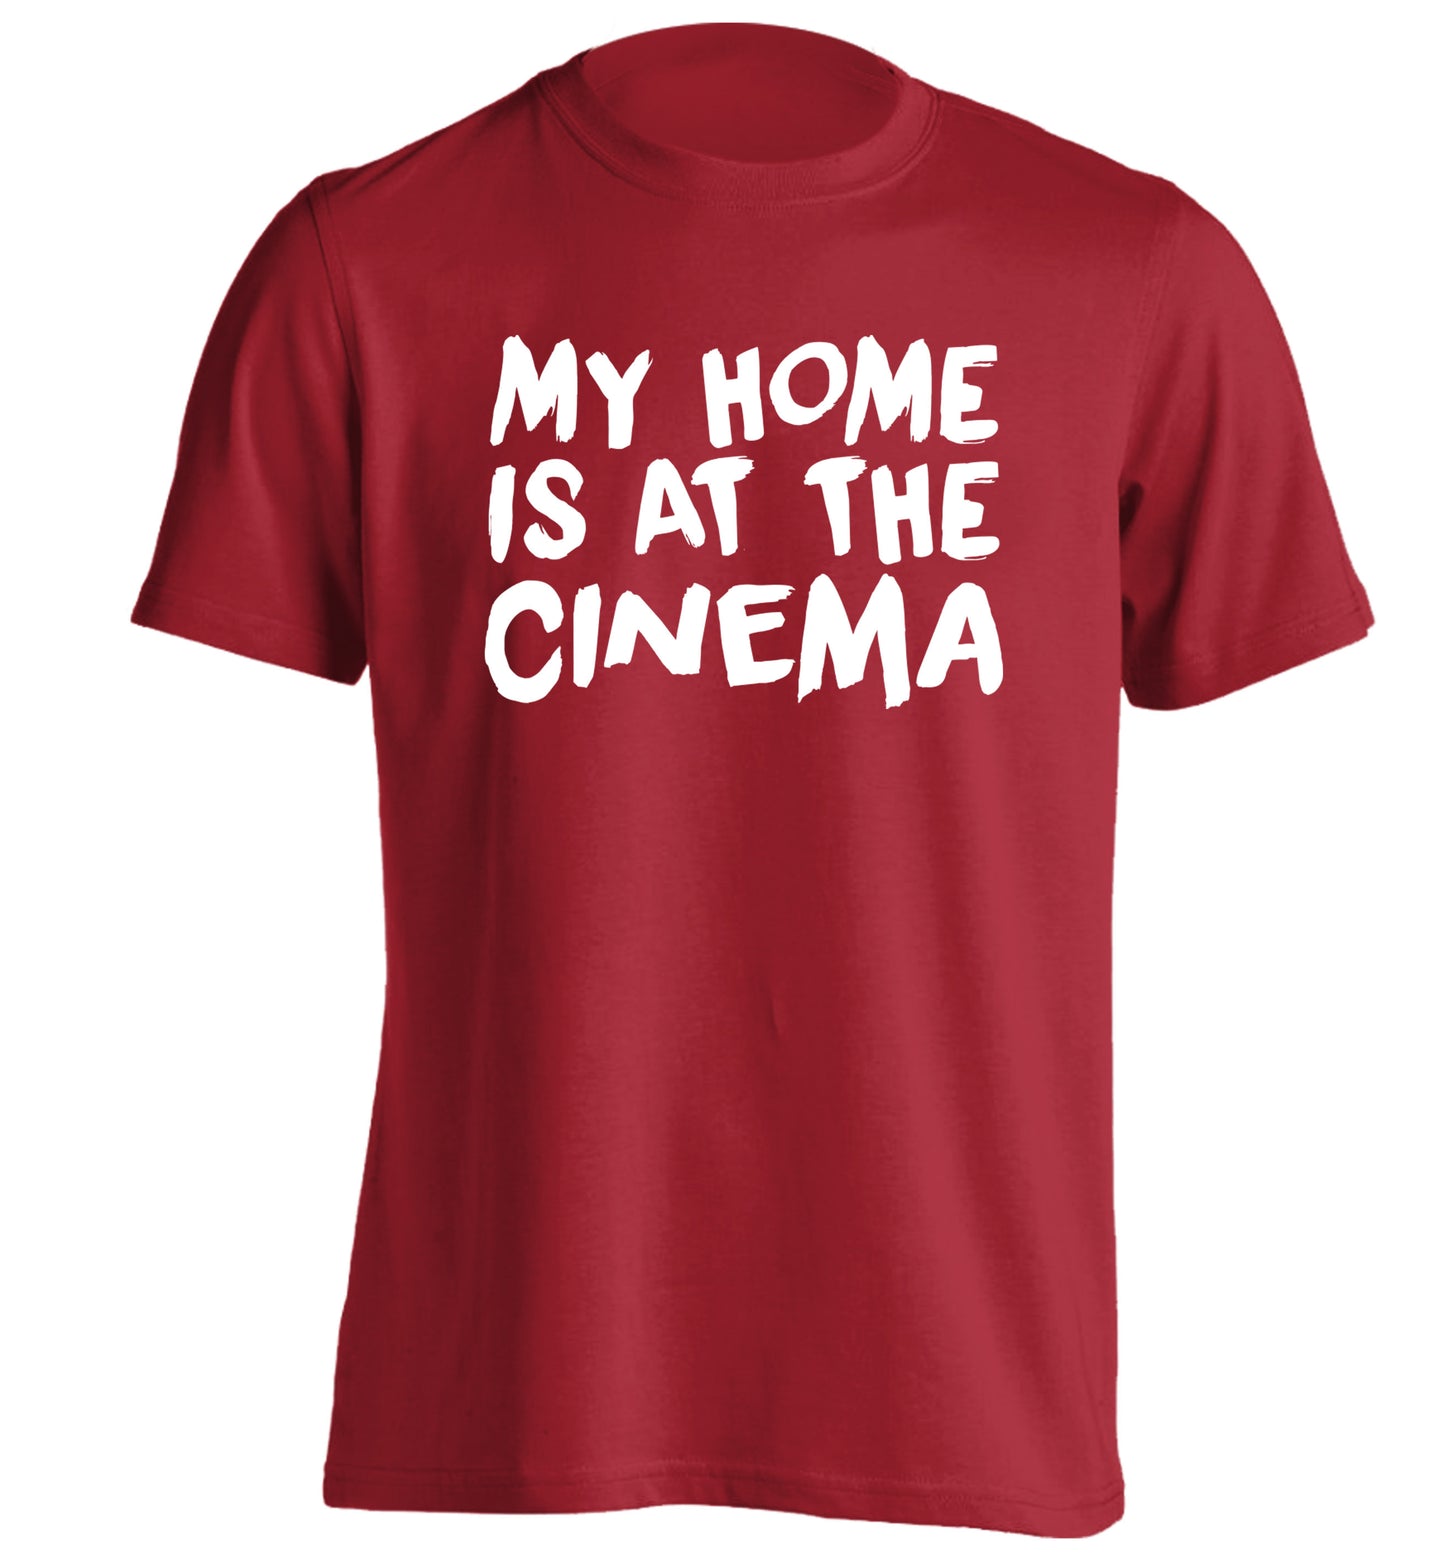 My home is at the cinema adults unisex red Tshirt 2XL